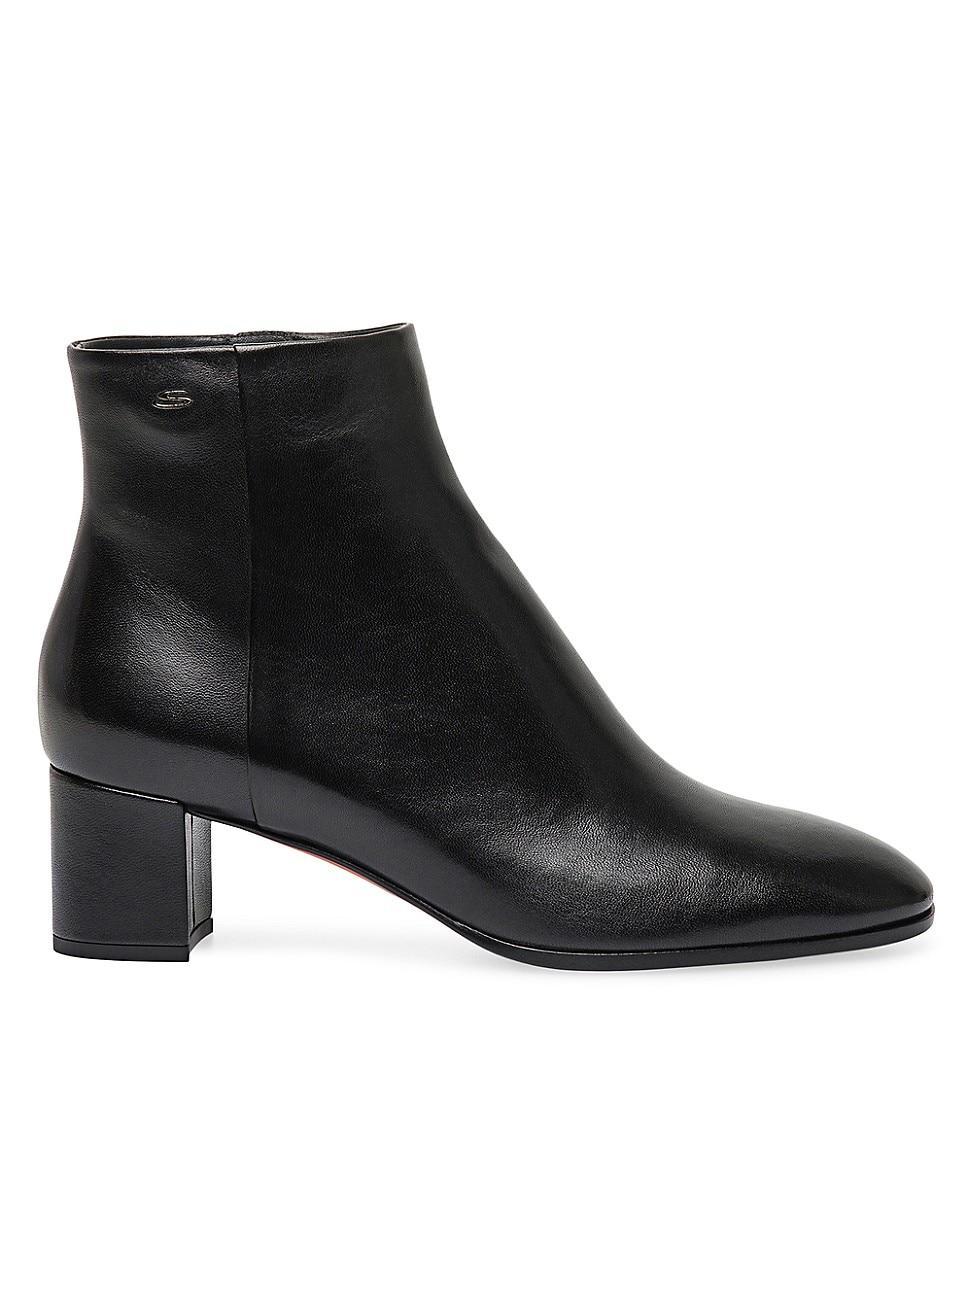 Womens 50MM Side-Zip Leather Booties Product Image